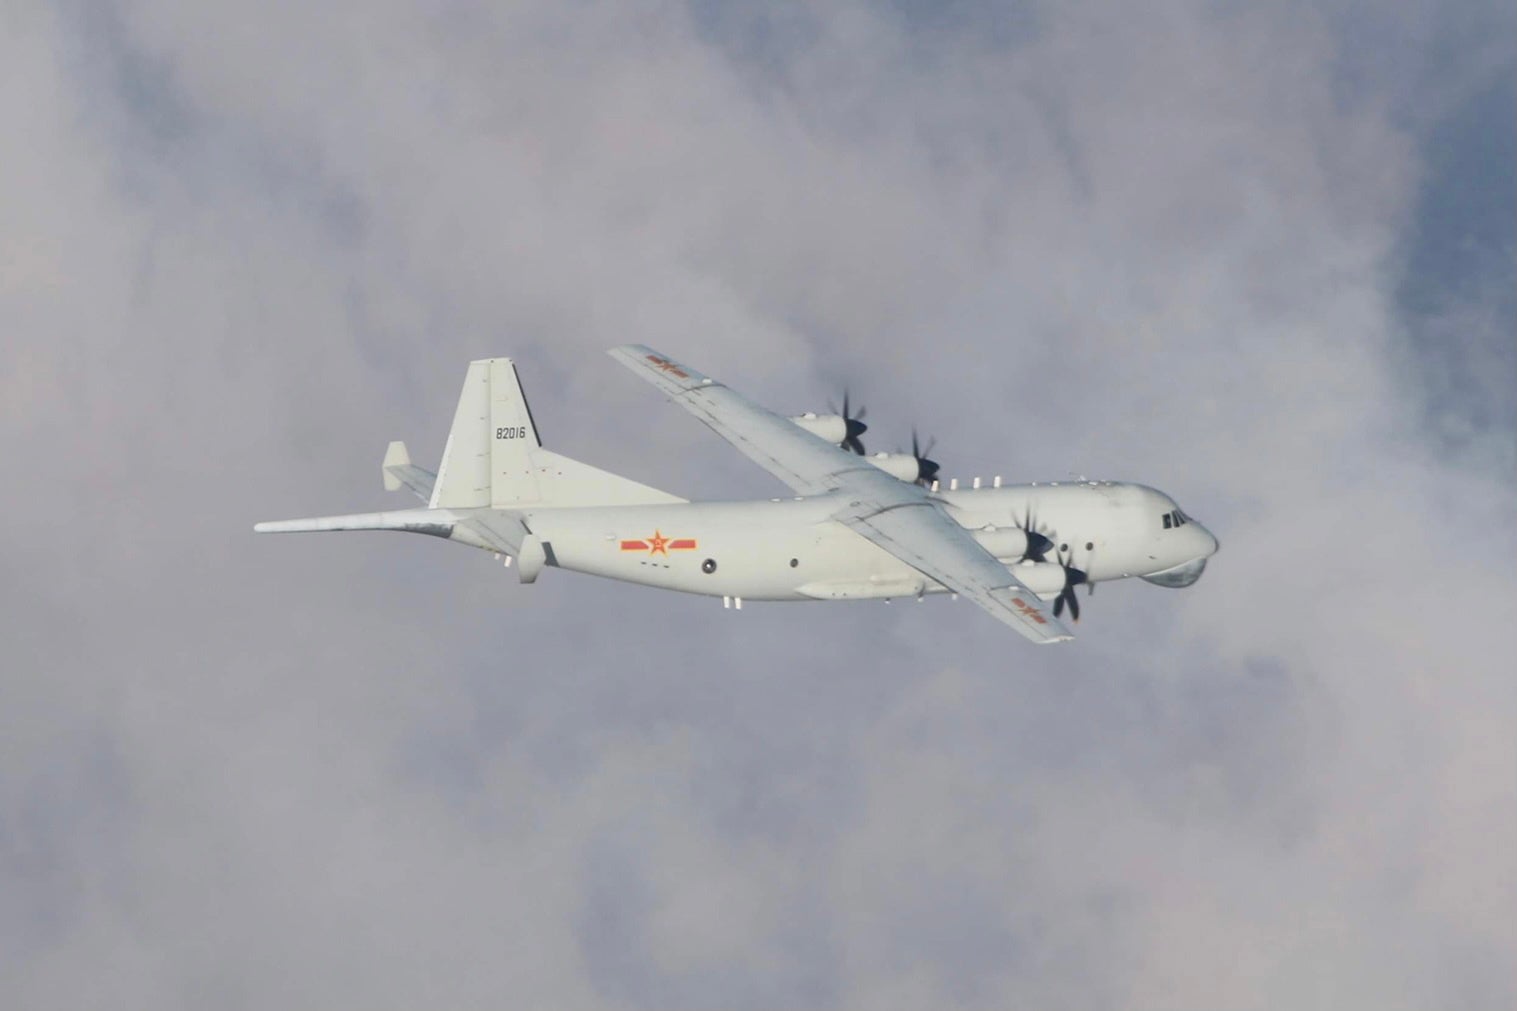 An undated handout photo made available by the Taiwan Ministry of National Defense shows PLA Y-8 Anti-Submarine Aircraft flies in an undisclosed location